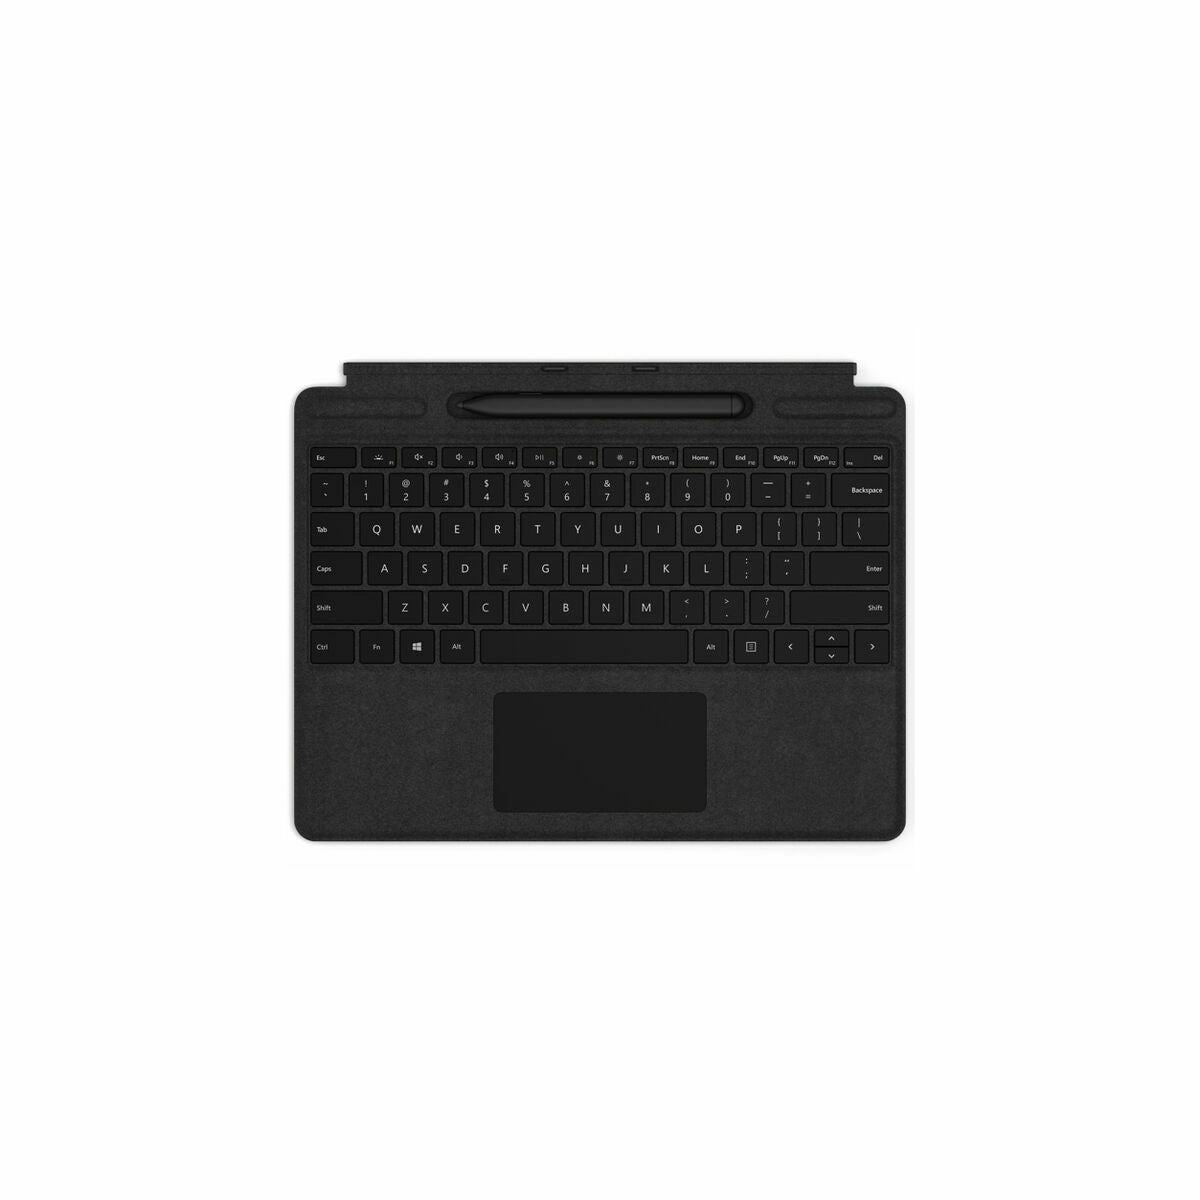 Case for Tablet and Keyboard Microsoft Black Silver (Refurbished A)